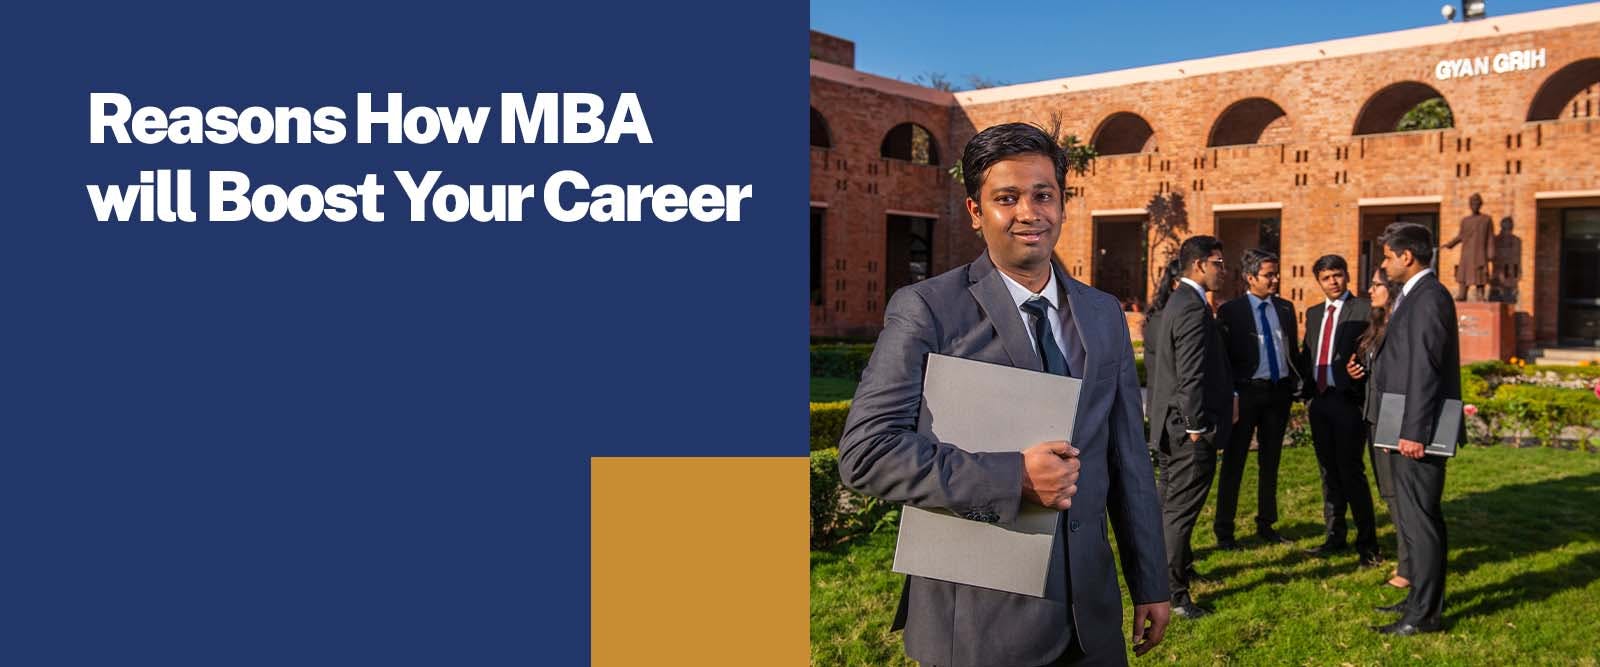 Reasons How MBA Will Boost Your Career